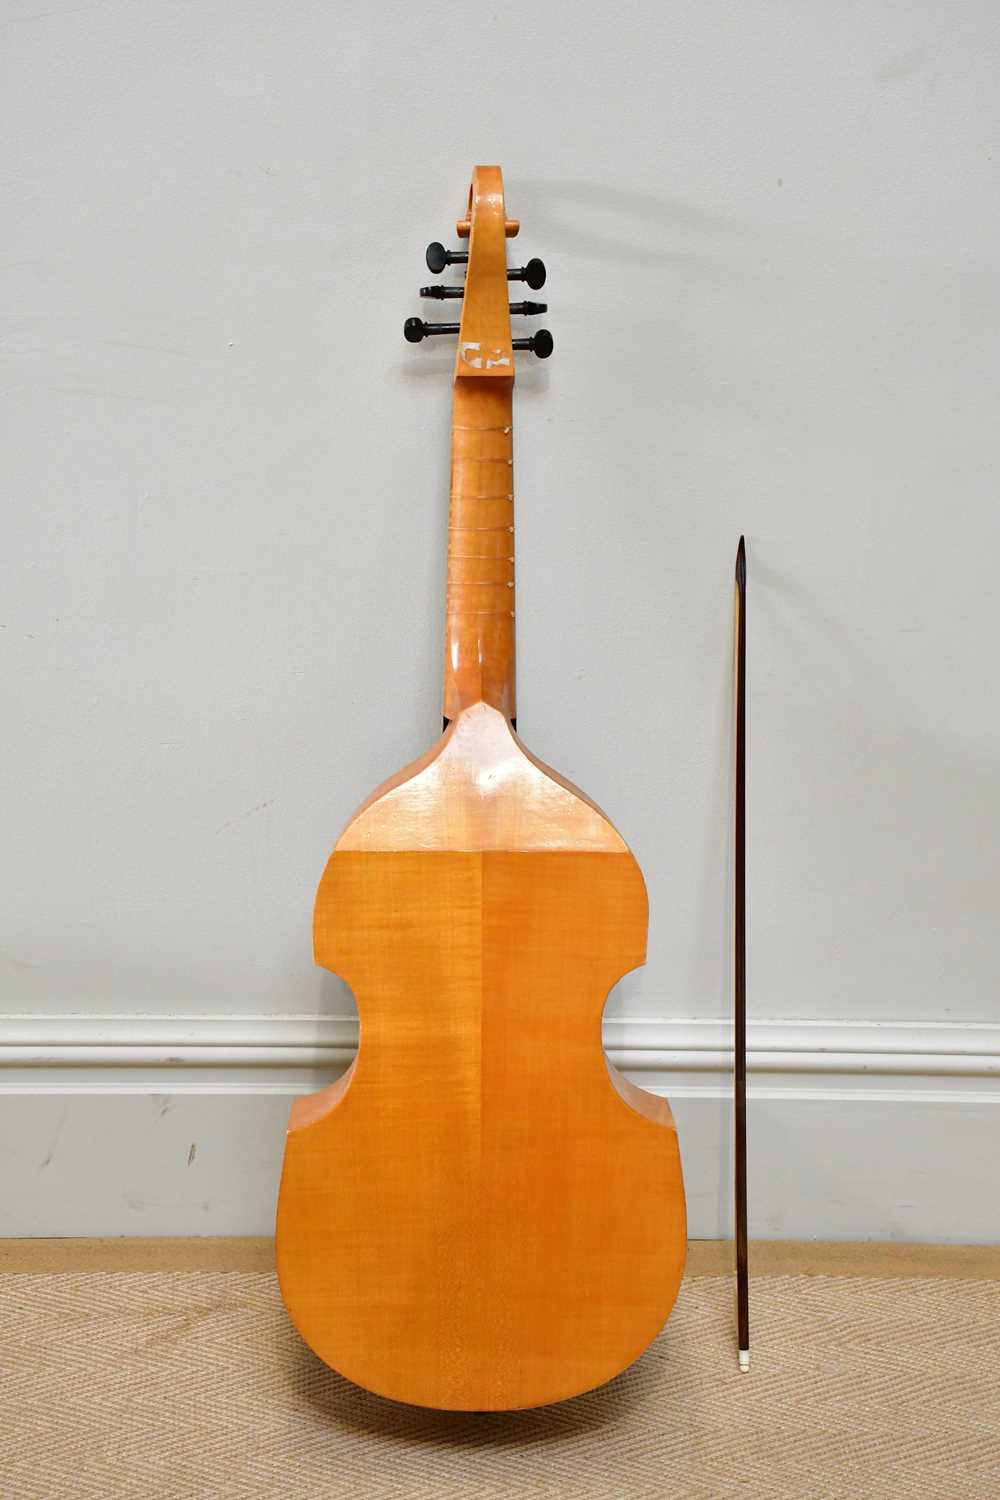 X MICHAEL PLANT; a contemporary viol labelled 'A student viol by Michael Plant Sheffield 1988', - Image 5 of 13